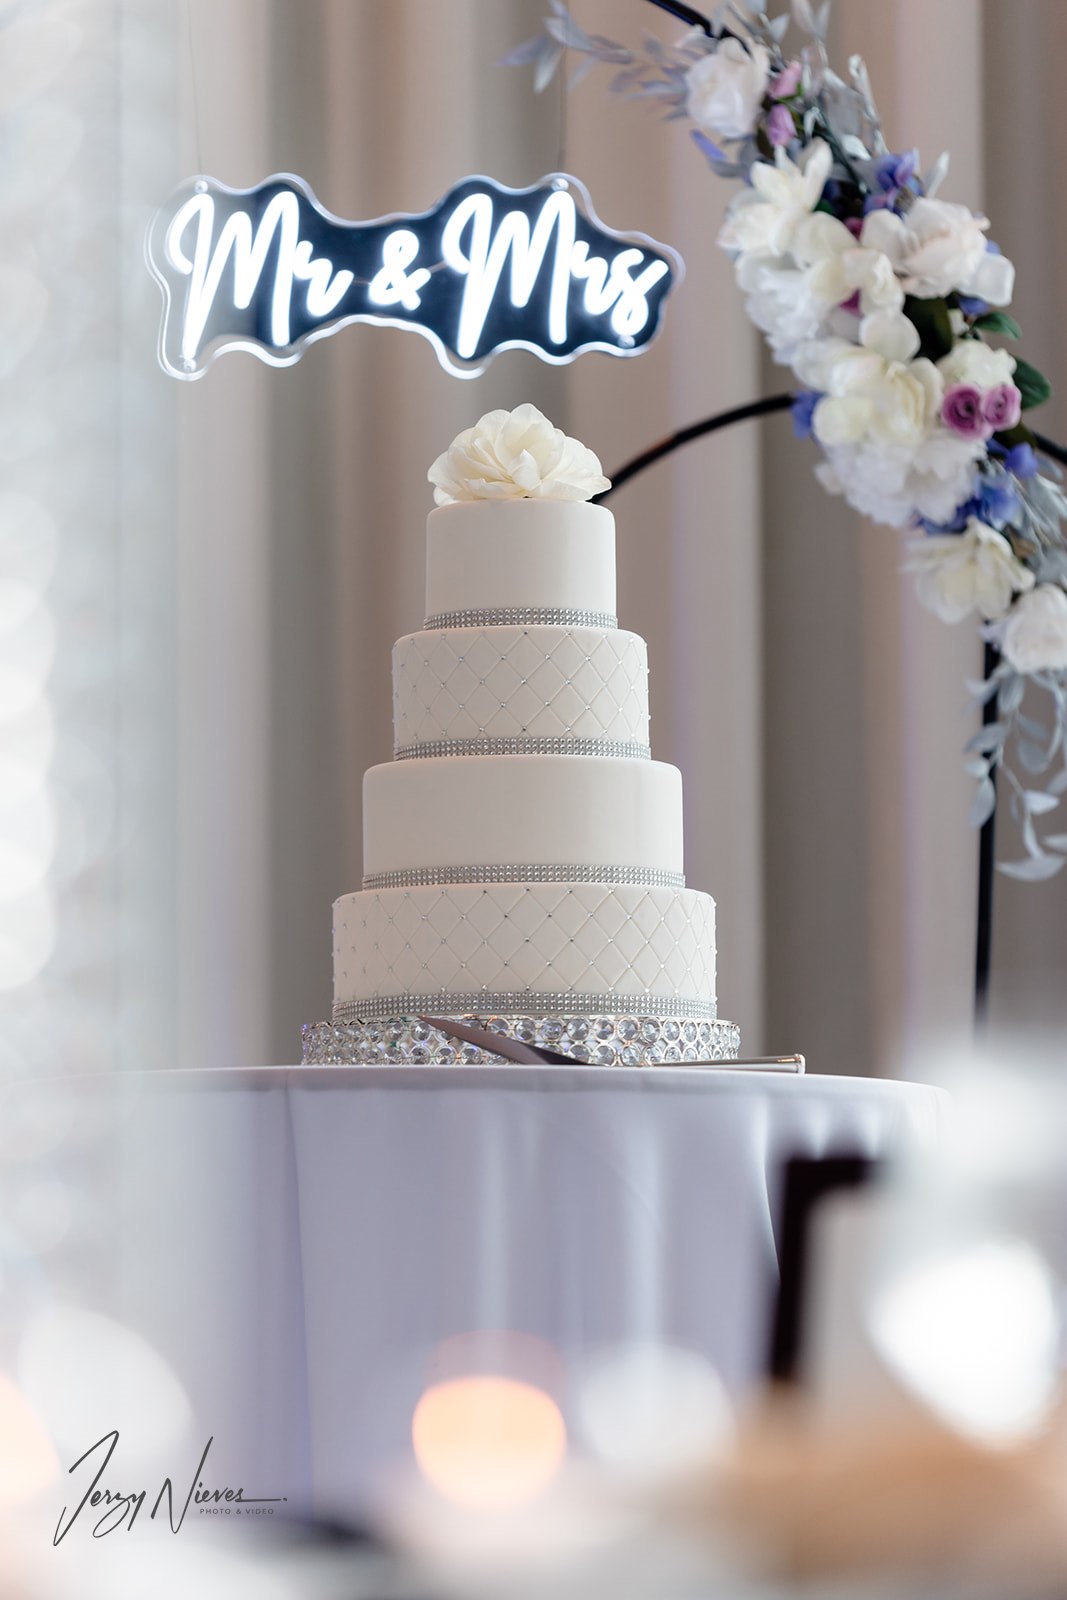 Close-up of a four-tier wedding cake with a "MR & MRS" light illuminating in the background.